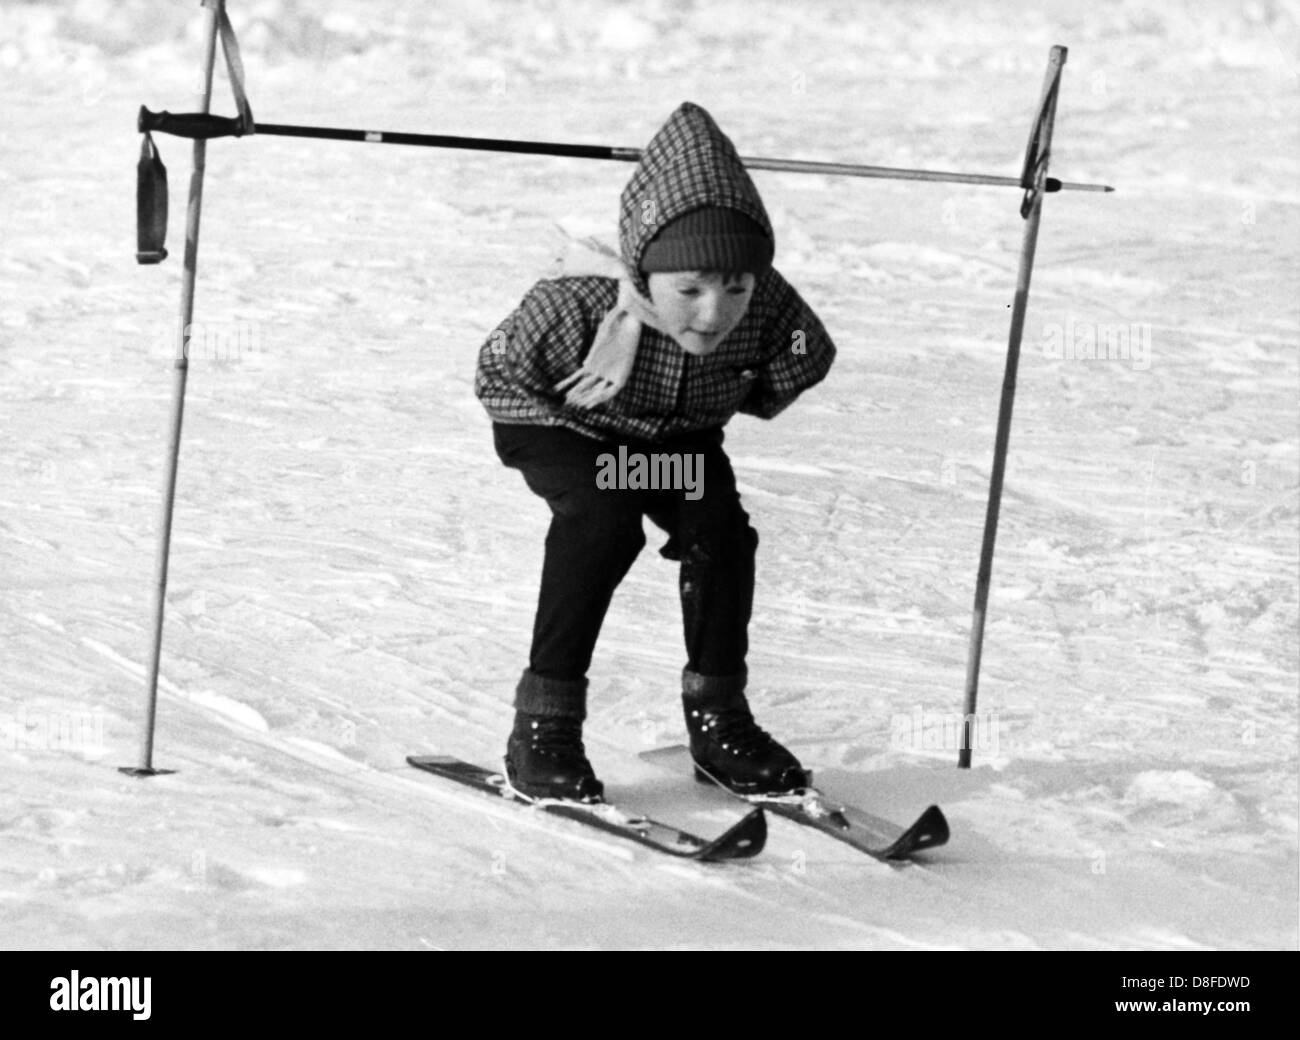 A disabled child passes through a goal build out of ski poles. 10 Contergan affected children from Iserlohn (Germany), learn how to ski in January 1968 in the Sauerland area in Germany. The experimental exercise, which is conducted by the Iserlohn Workers' Welfare Association at a children's home near Schürfelde (Meinertzhagen, Germany), aims to test new active exercise therapies. The school aged children are attended to by a physical therapist and a ski instructor. Stock Photo